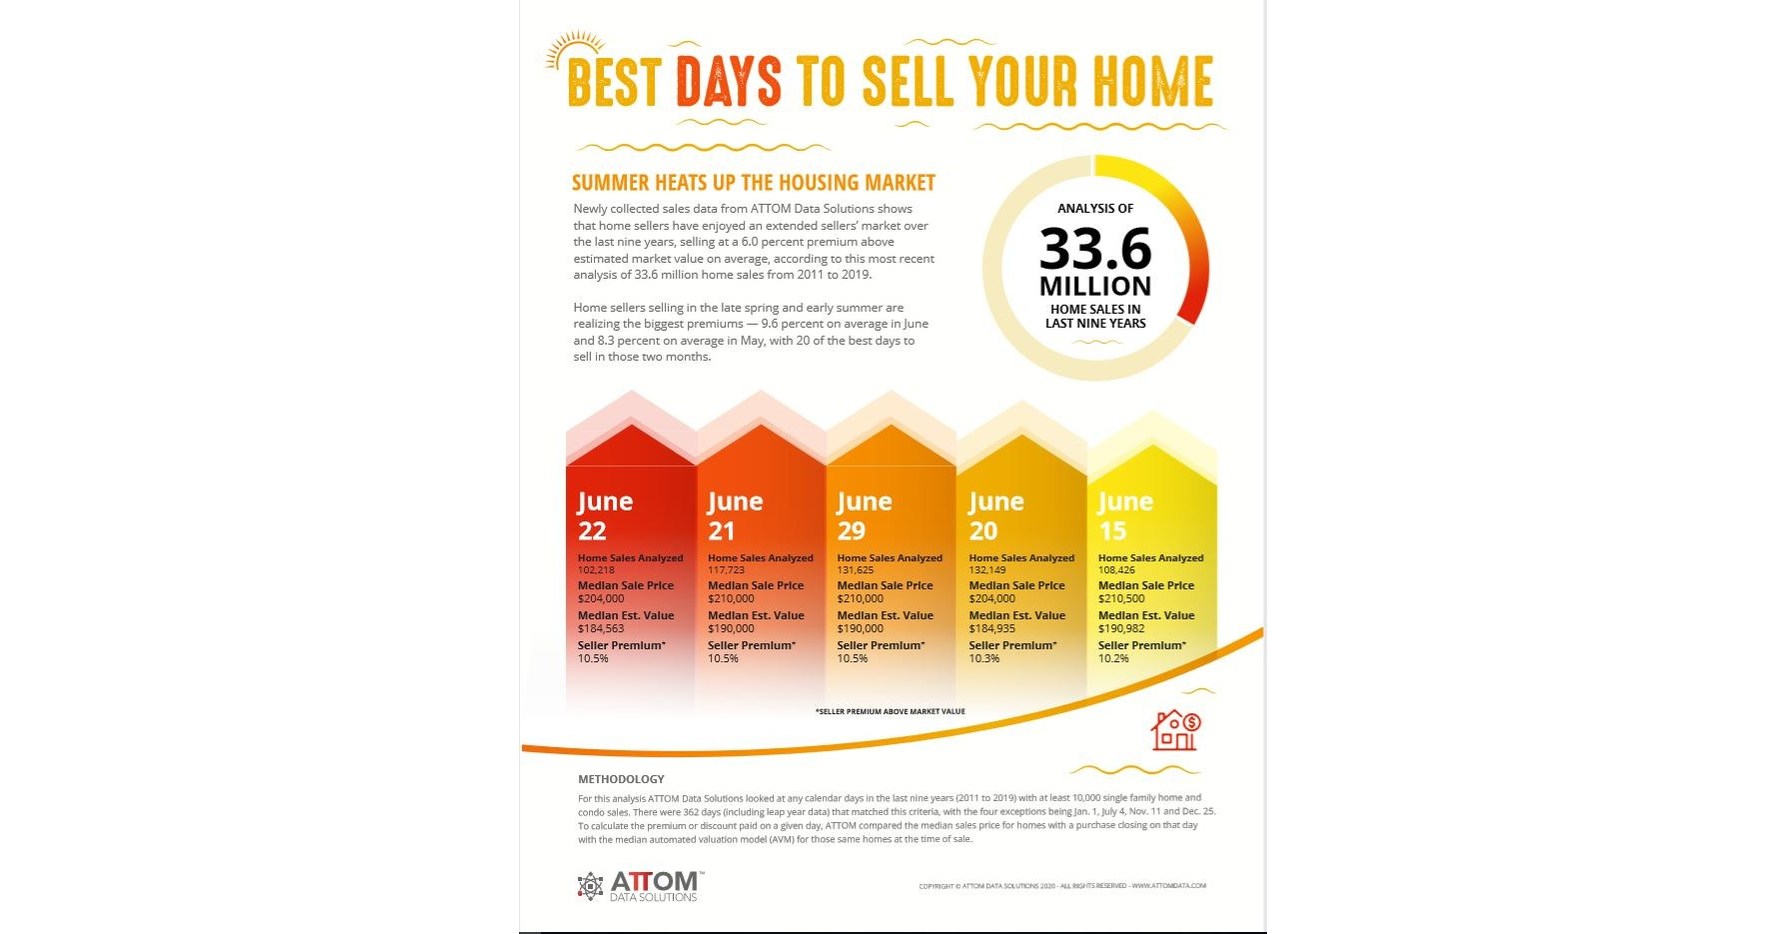 Annual Analysis Reveals New Best Days Of The Year To Sell A Home